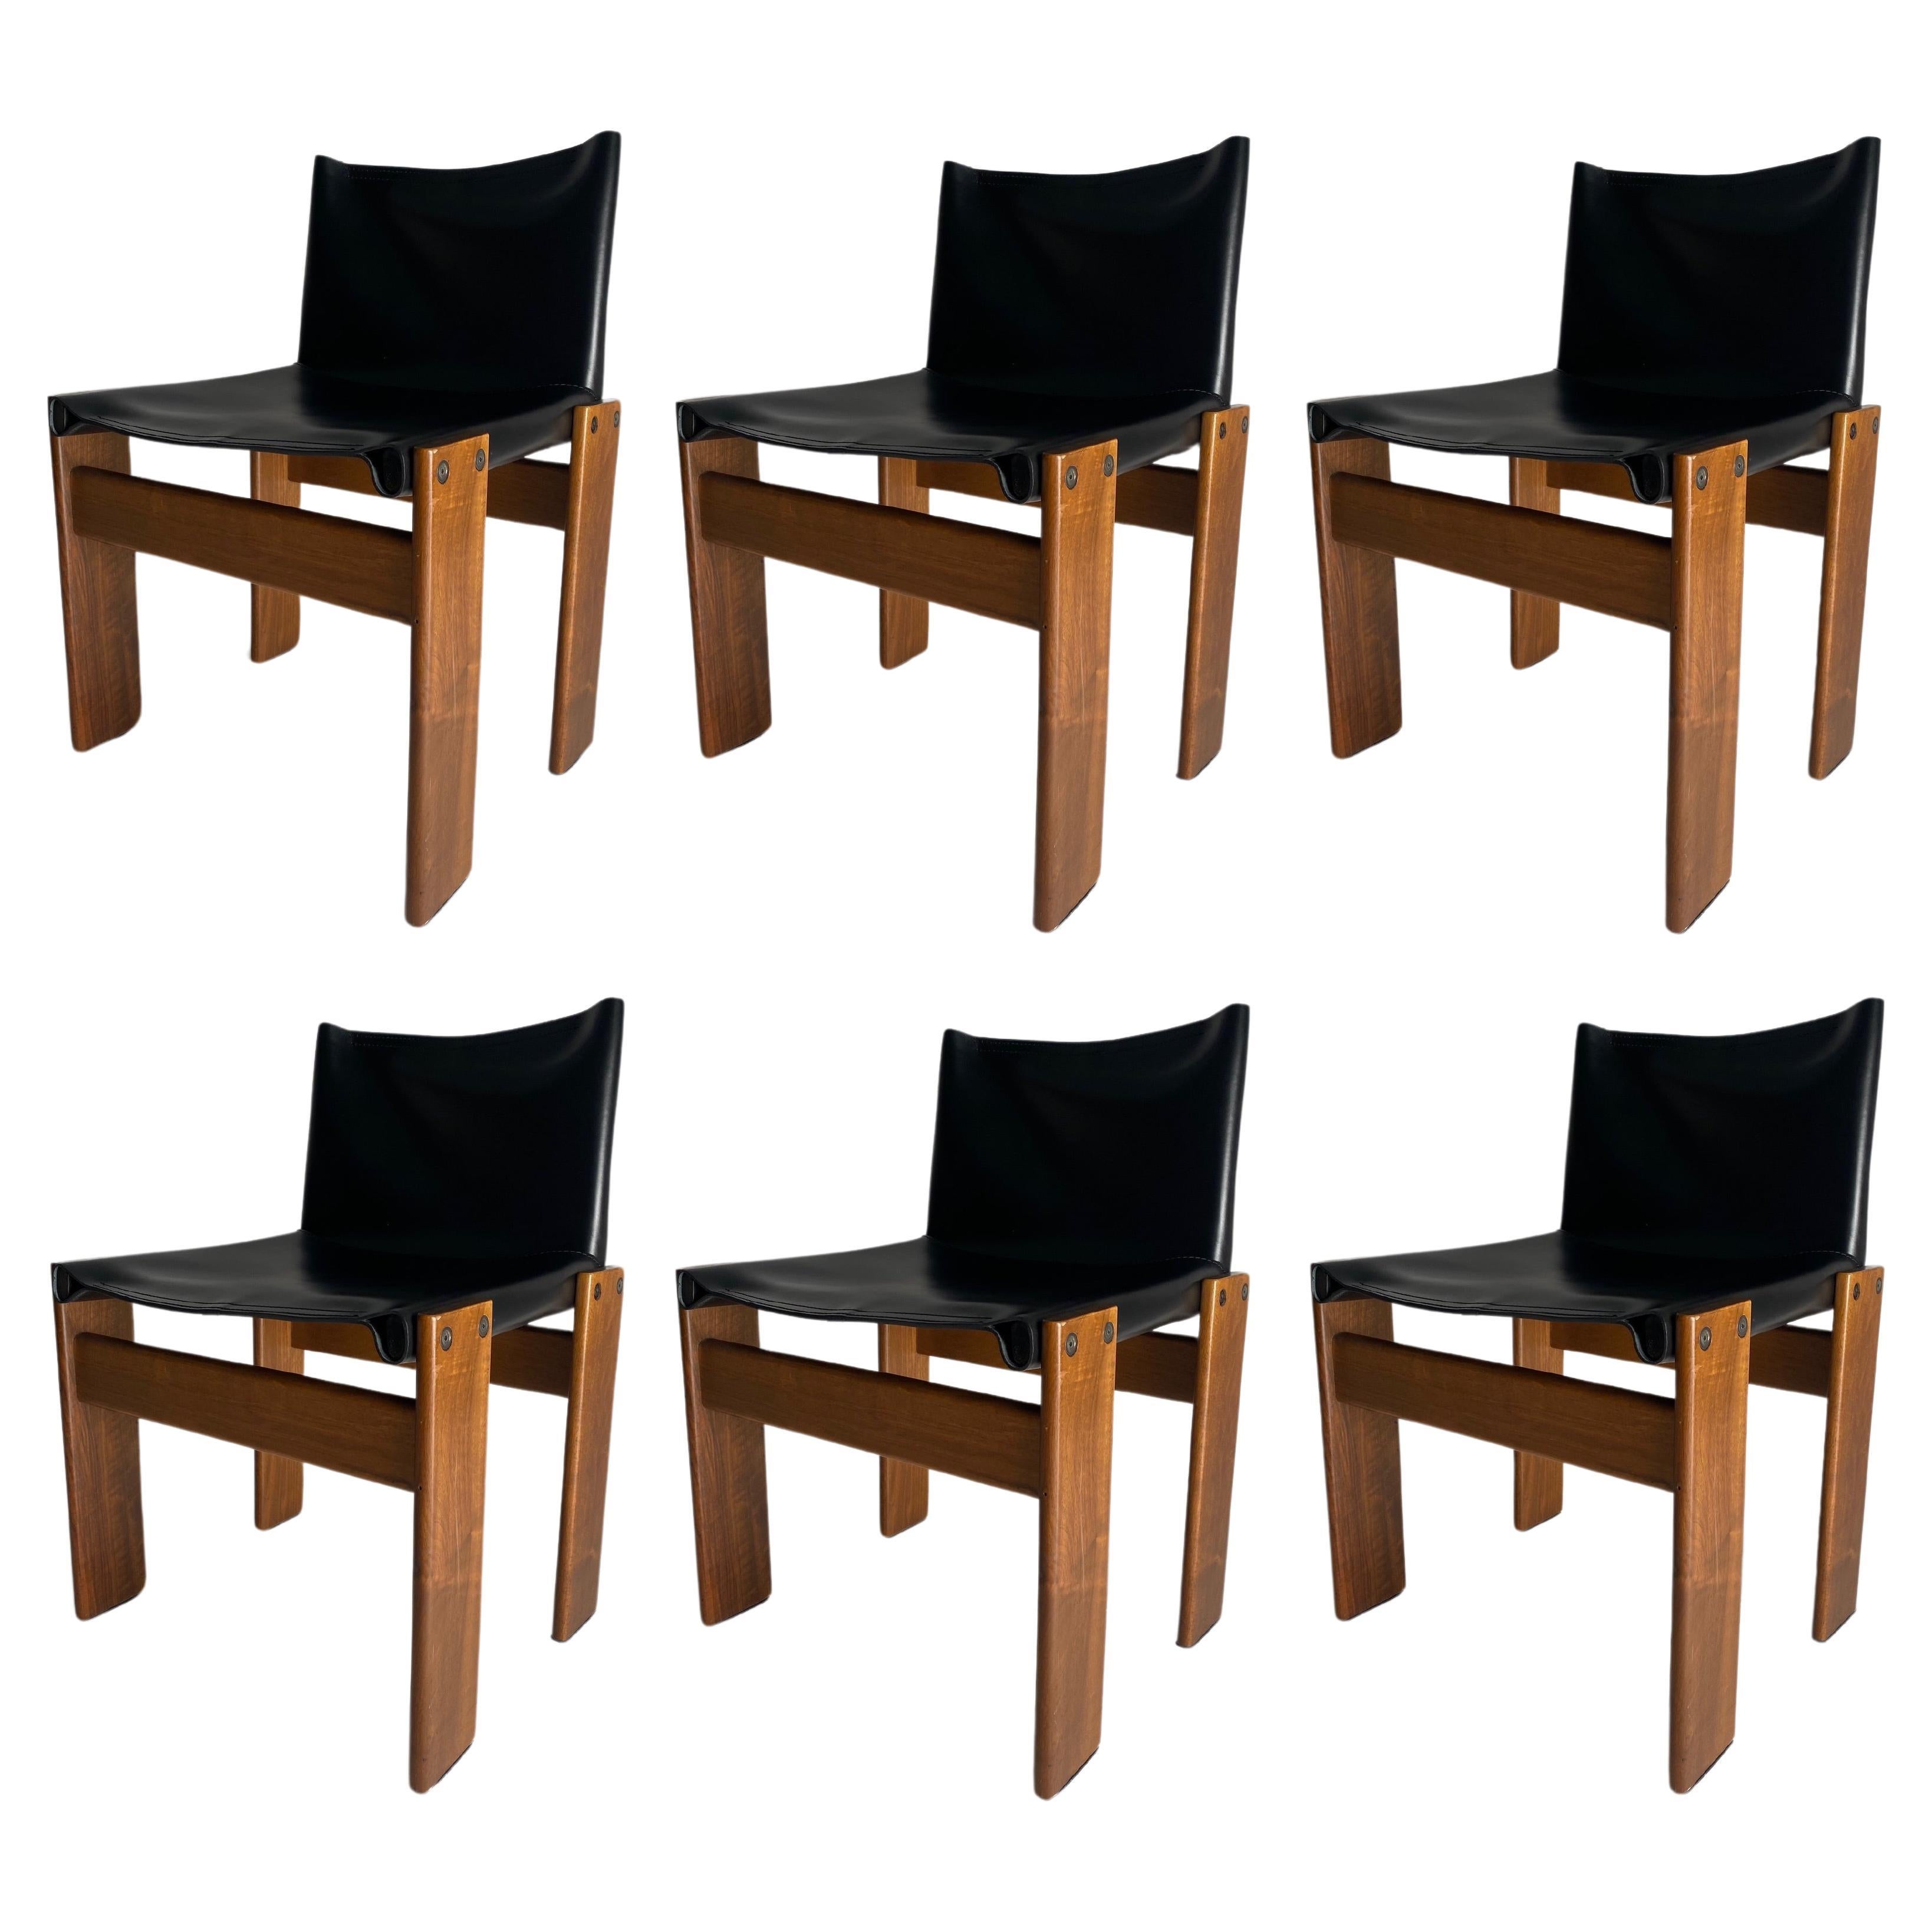 Set of 6 Monk leather Chairs by Afra & Tobia Scarpa for Molteni, Italy 1974 For Sale